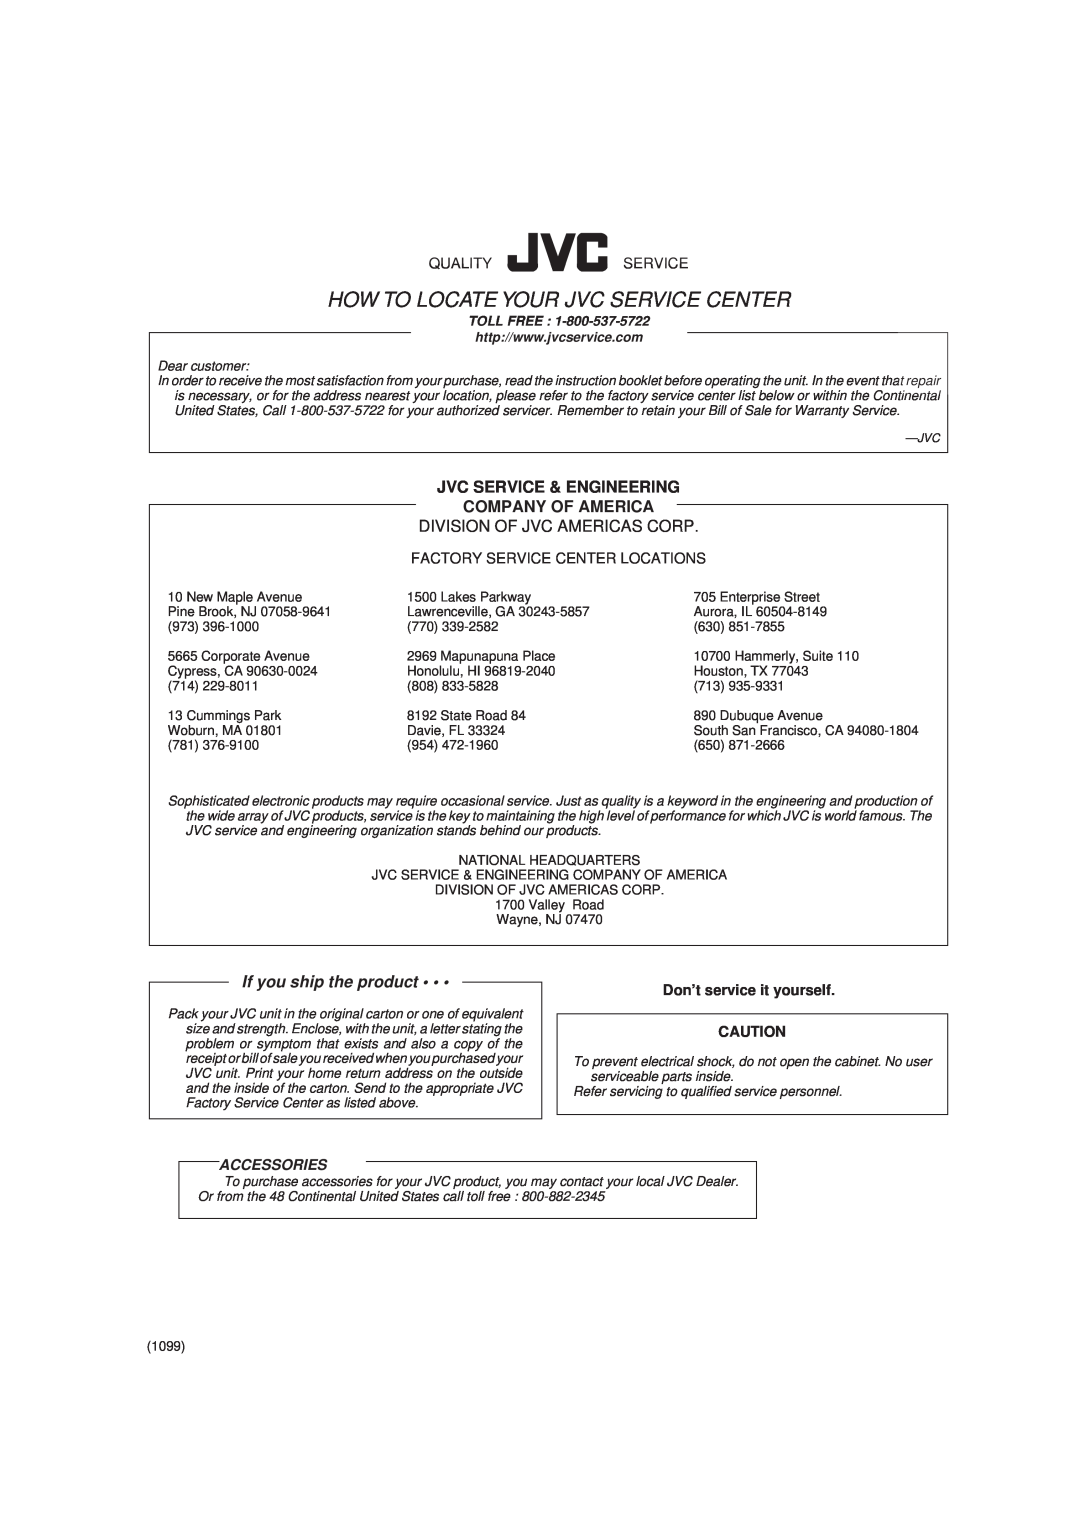 JVC RX-7010VBK manual Jvc Service & Engineering Company Of America, How To Locate Your Jvc Service Center, Qualityservice 